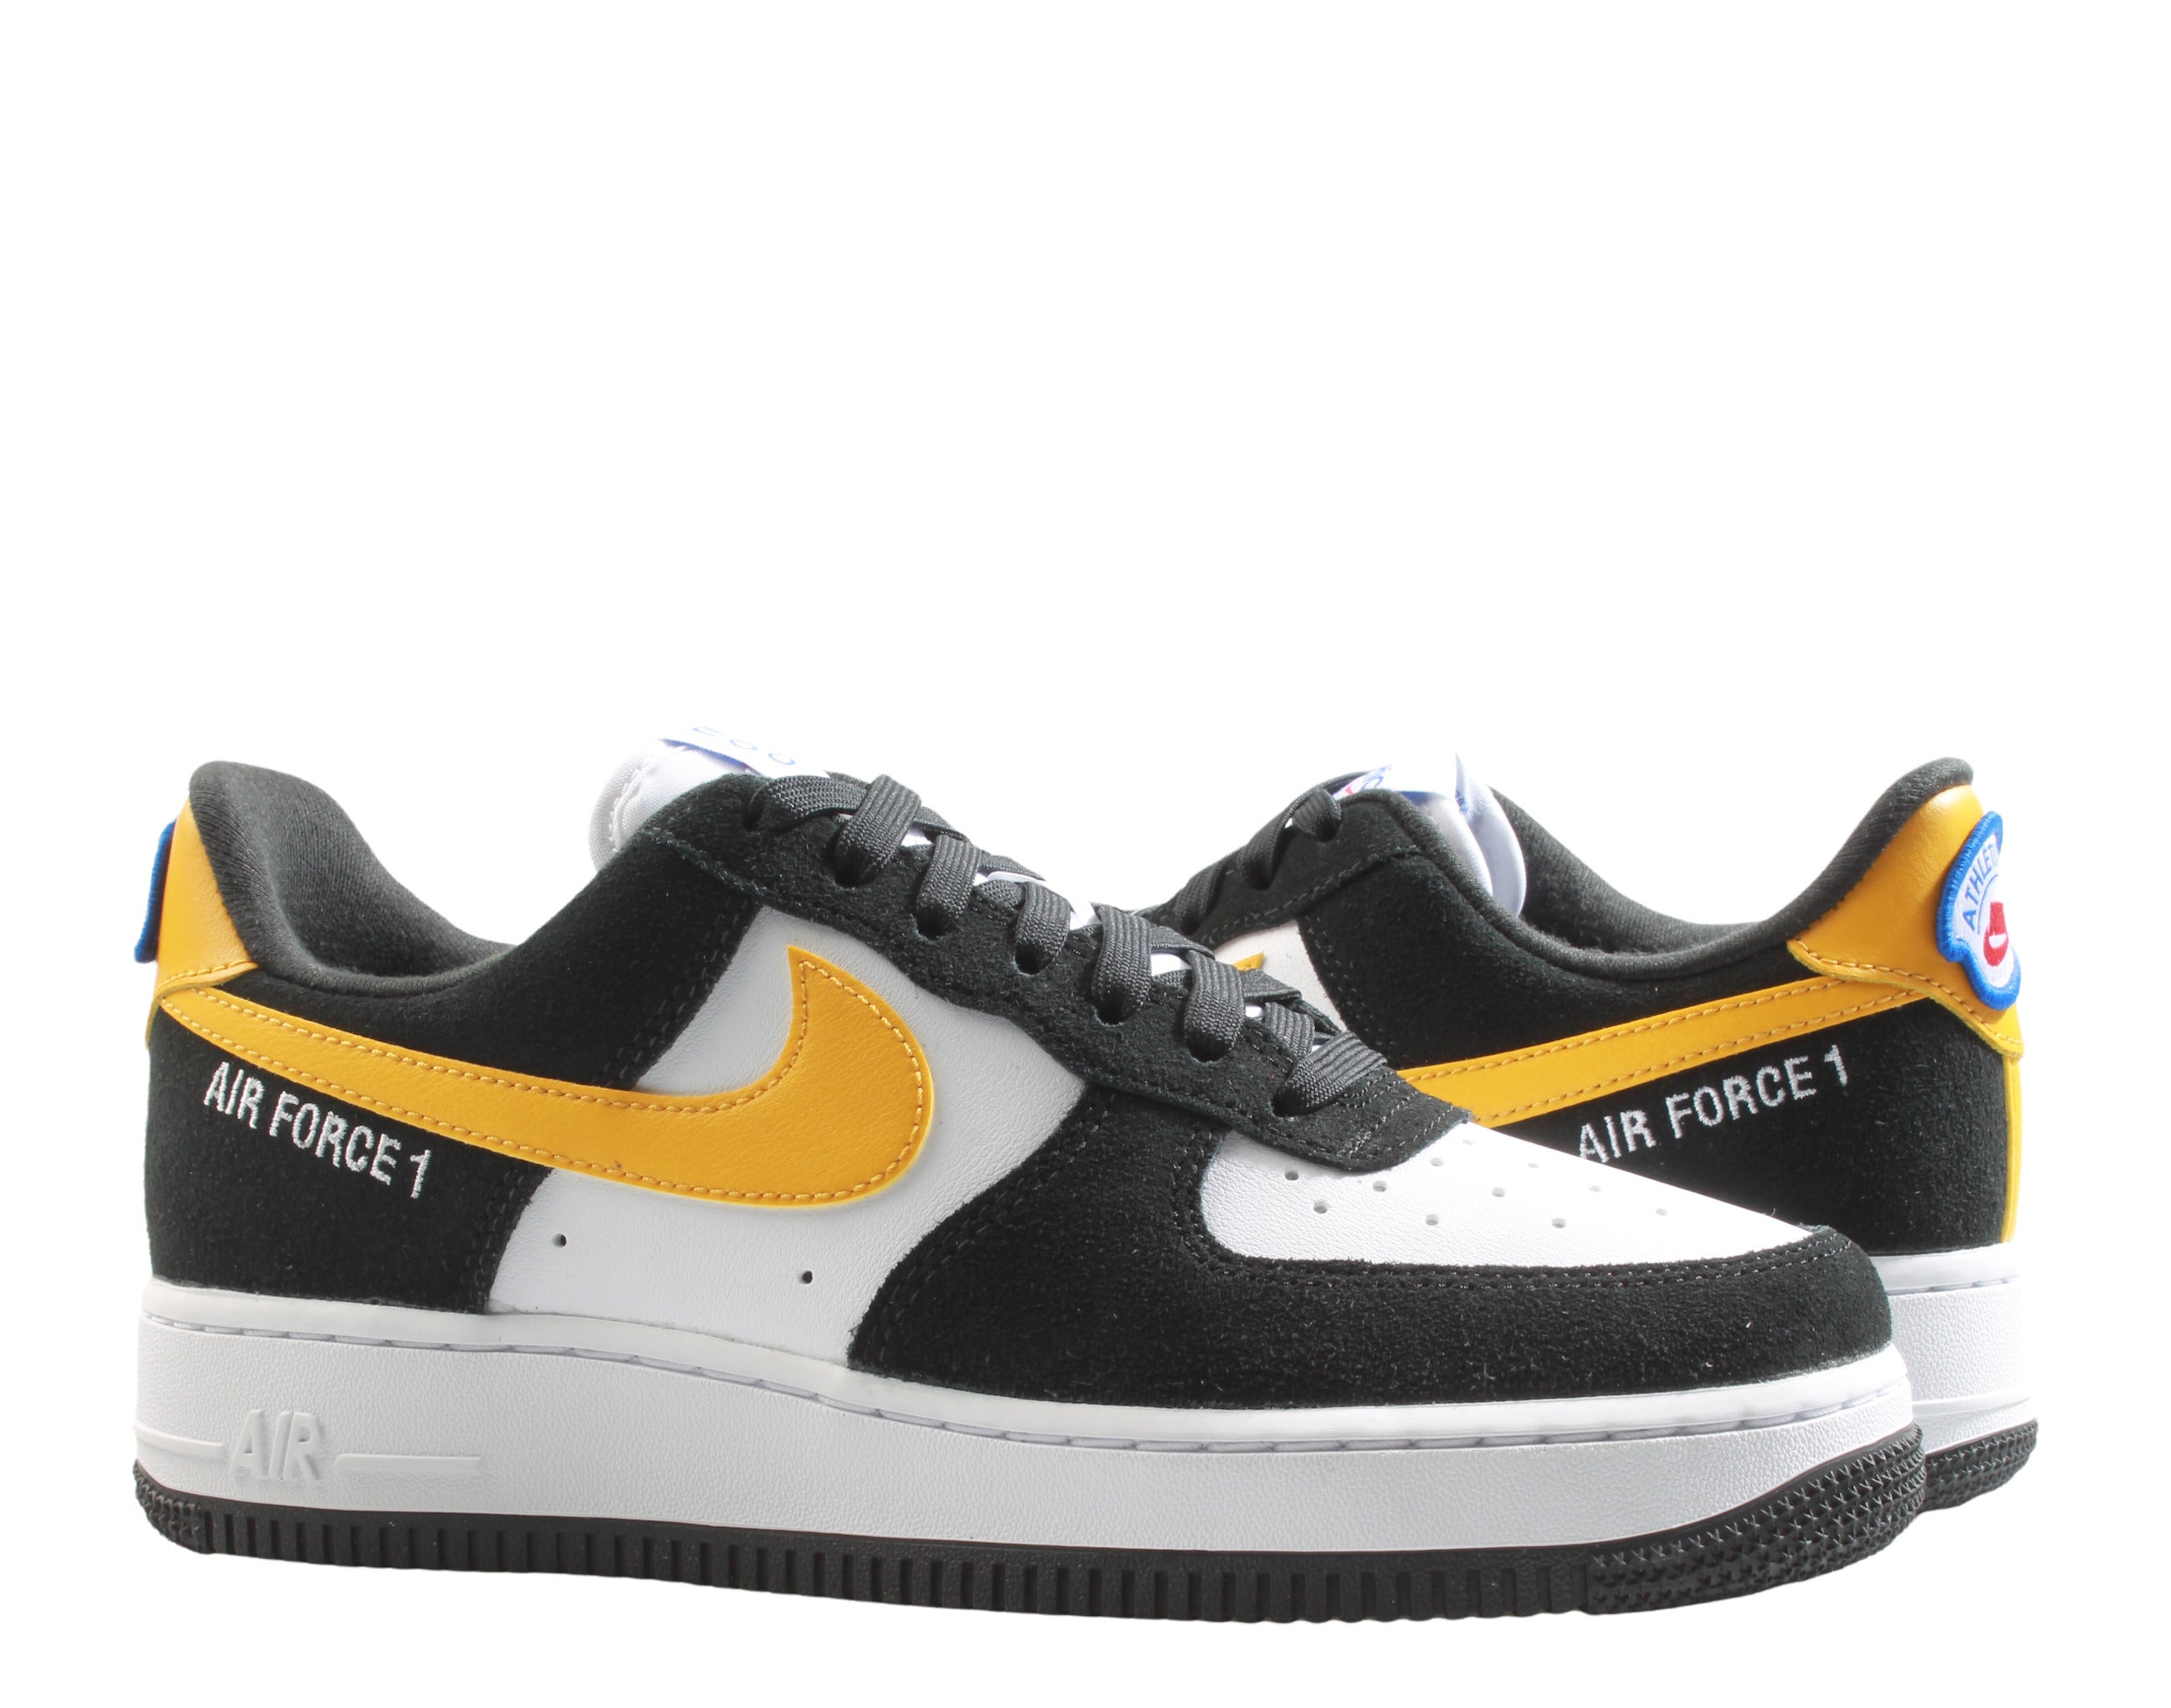 Nike Men's Air Force 1 '07 LV8 WW Basketball Shoes